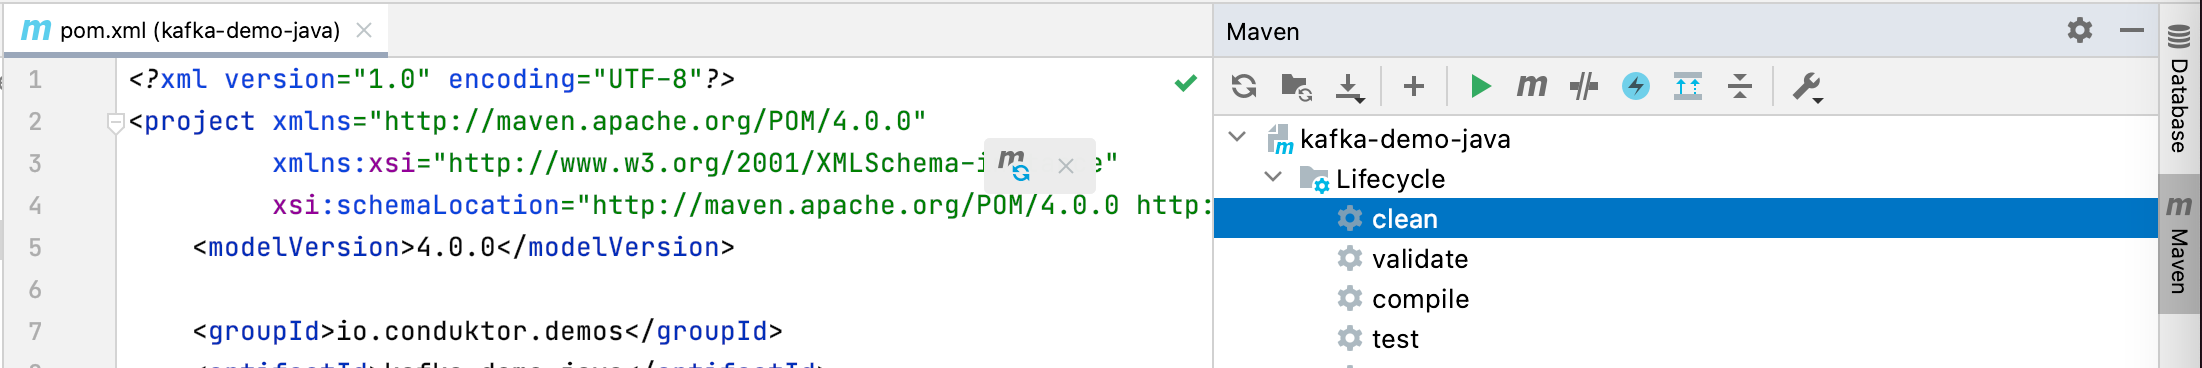 Screenshot showing the Maven Projects window on the right for our Kafka Maven project.